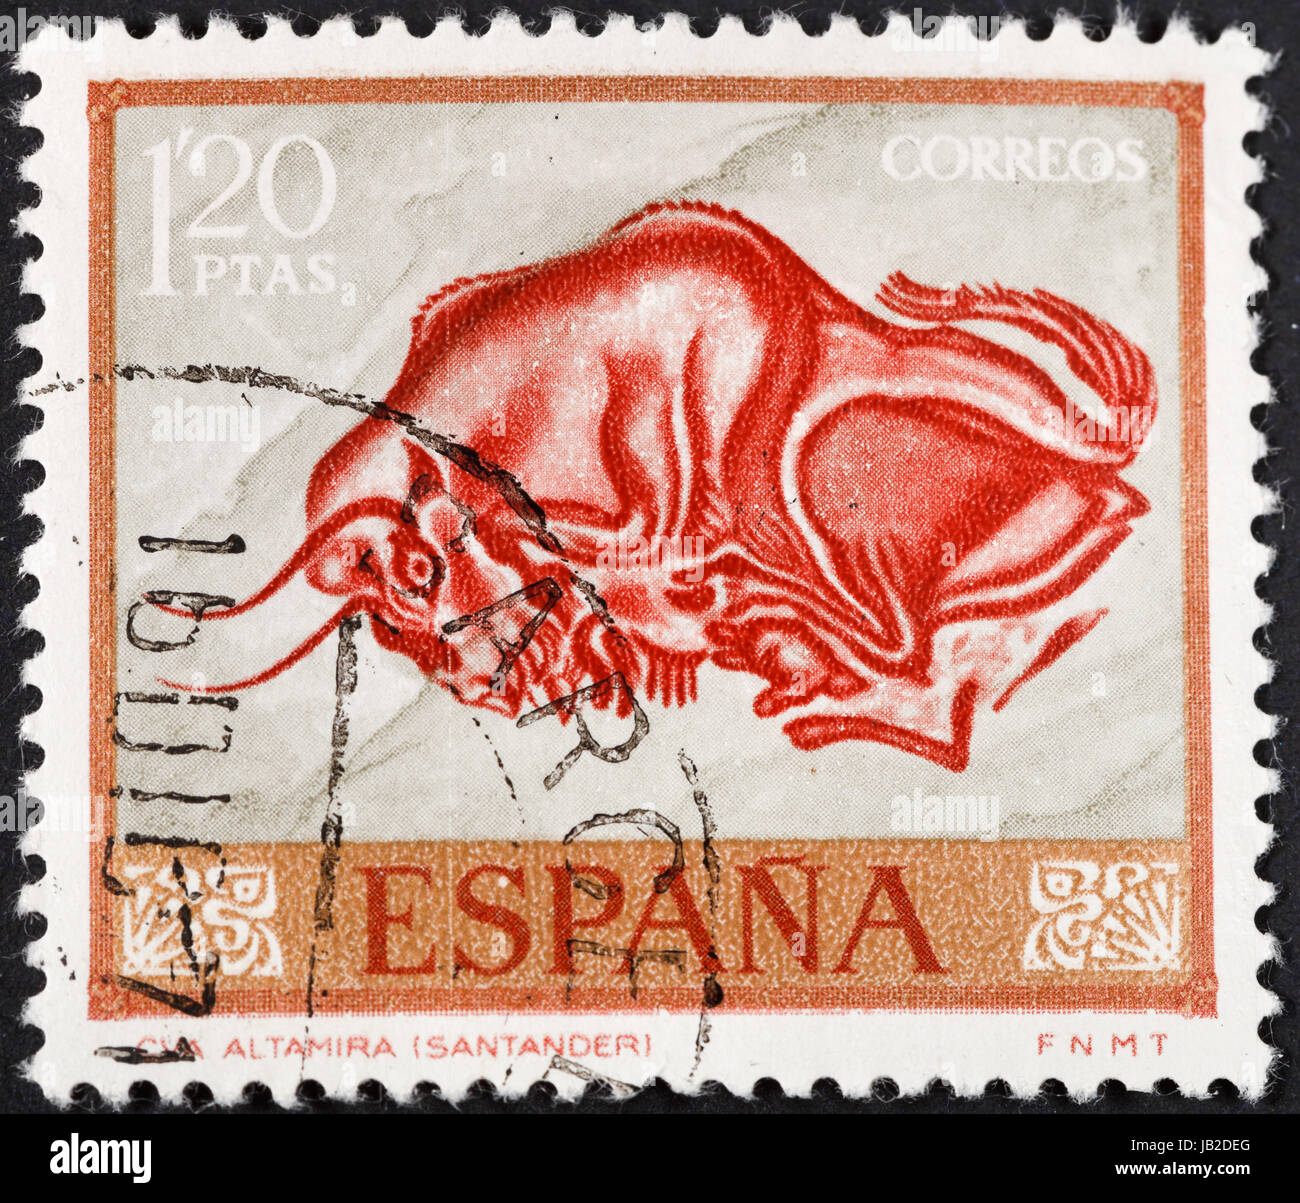 SPAIN - CIRCA 1967: A postage stamp printed in the Spain rock paintings in Altamira caves of Spain - , circa 1967 Stock Photo